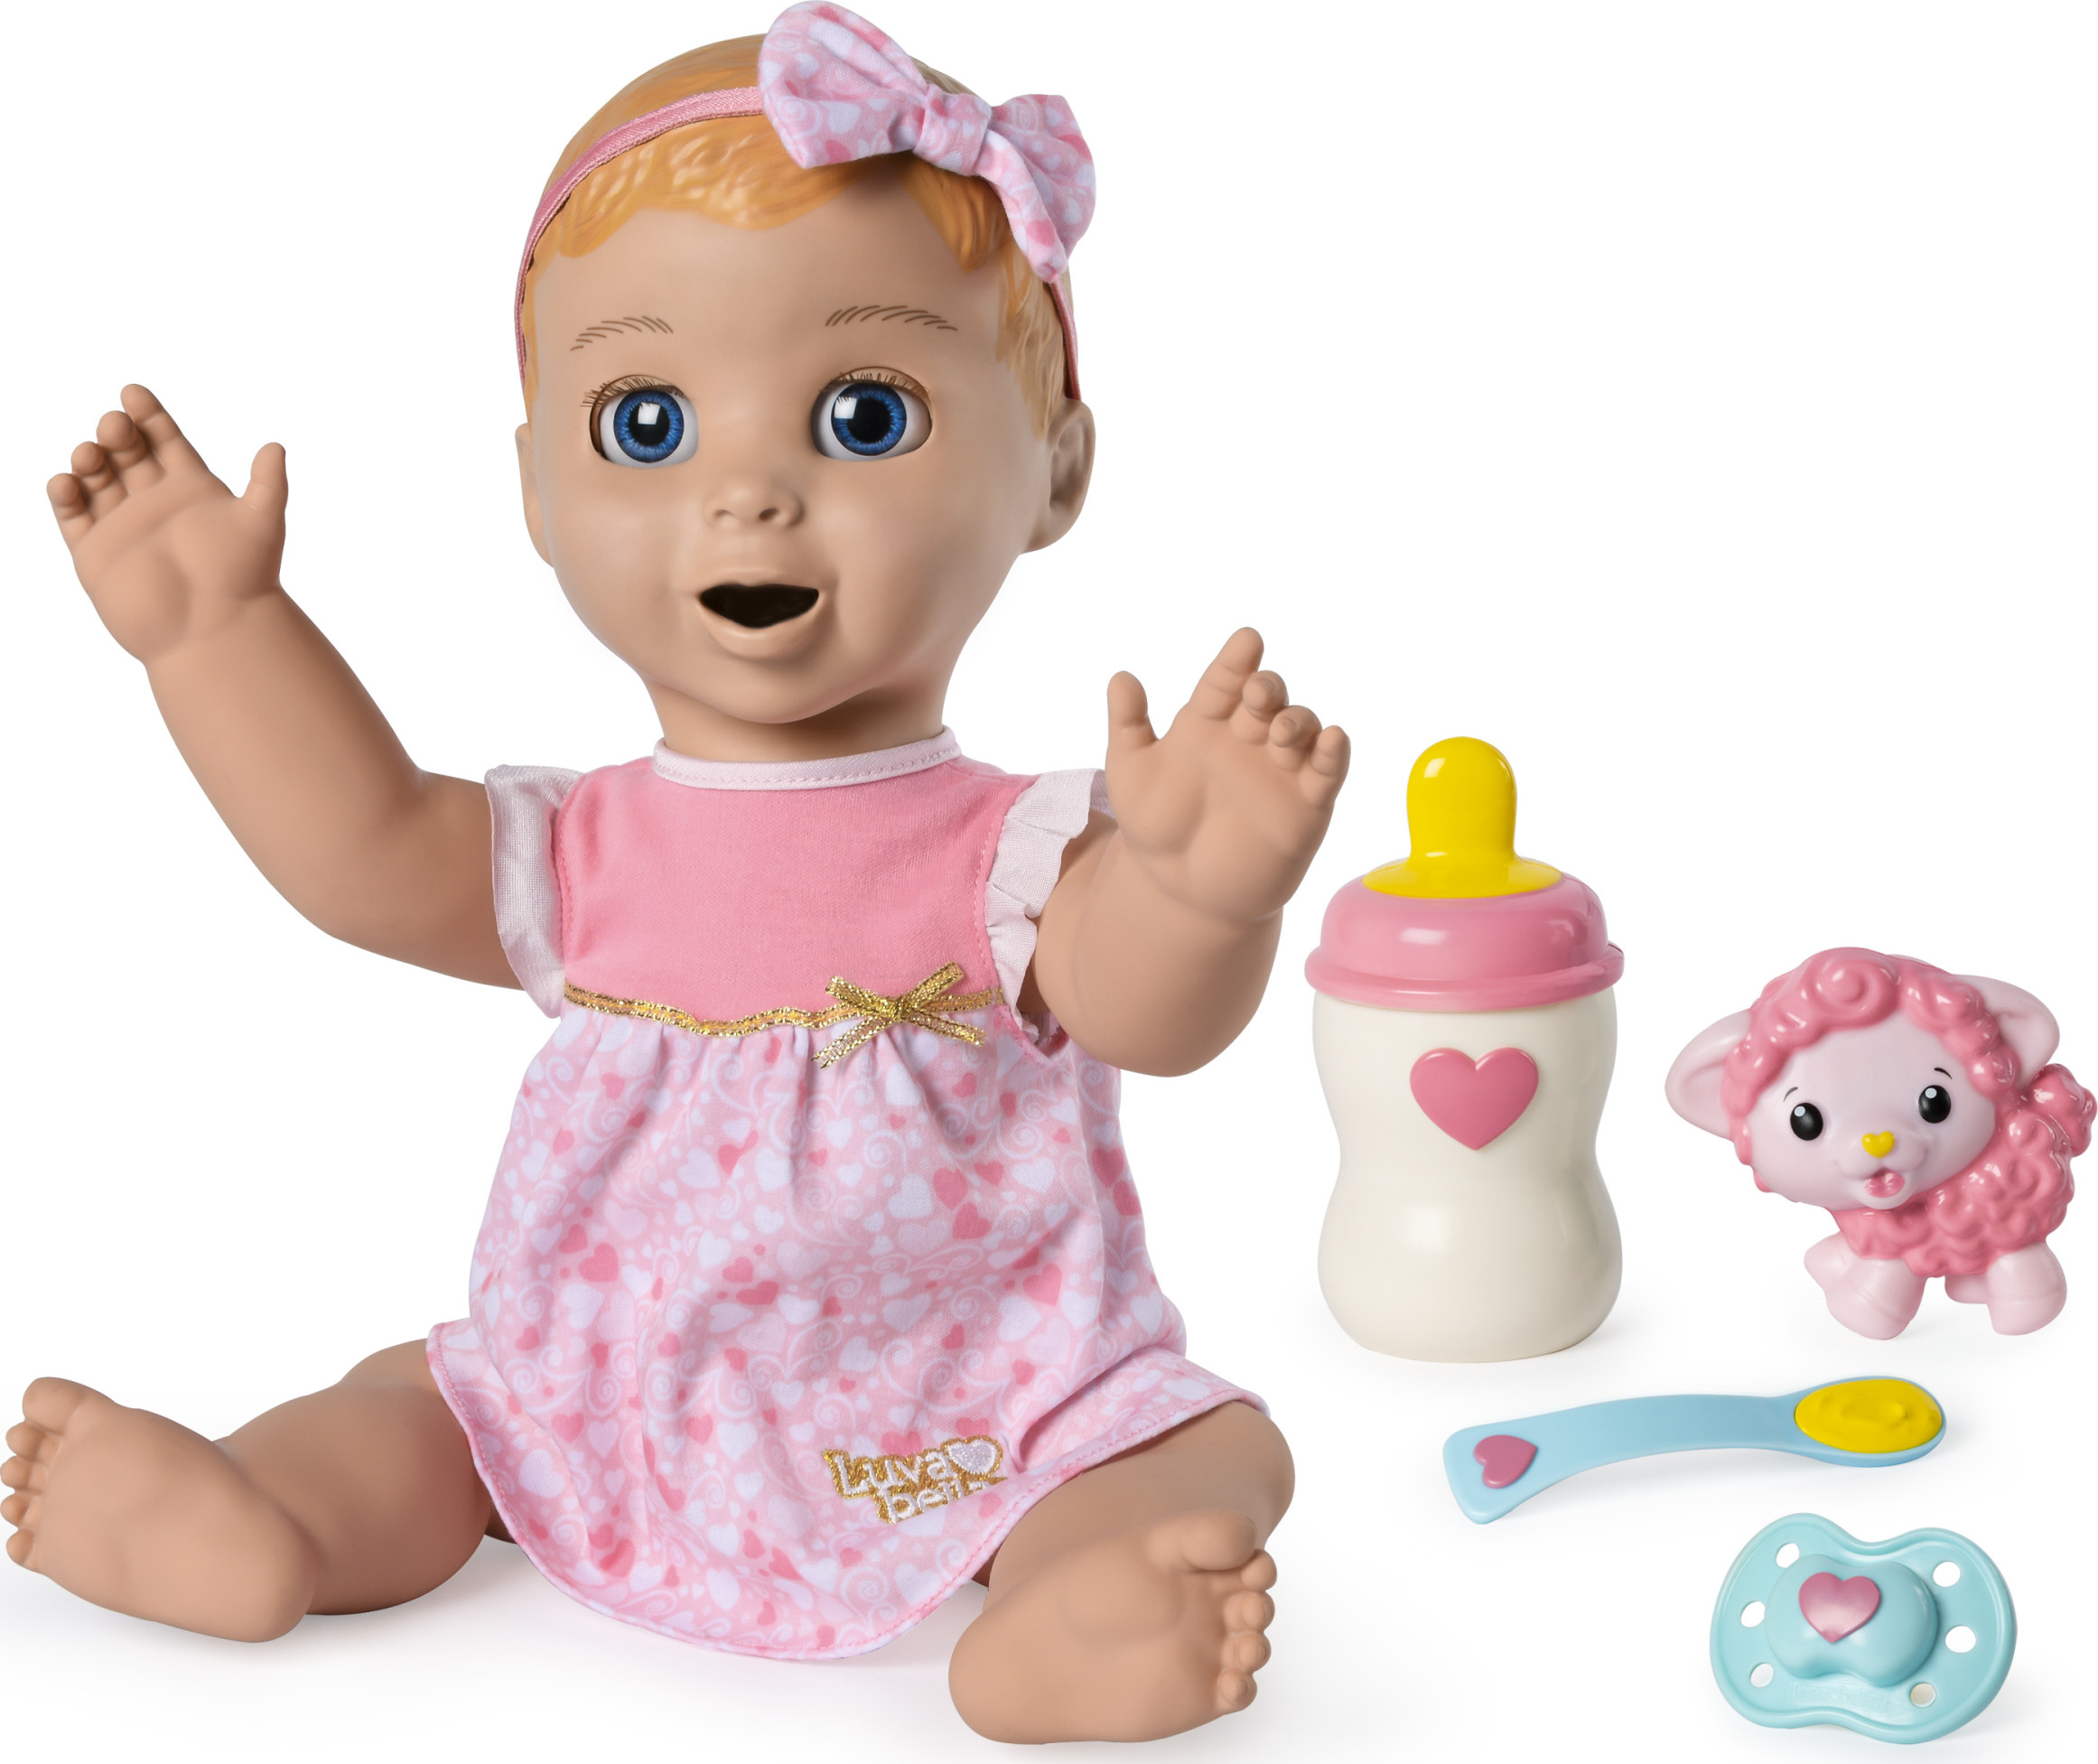 Luvabella Blonde Hair, Responsive Baby Doll with Real Expressions and Movement, for Ages 4 and Up - image 1 of 8